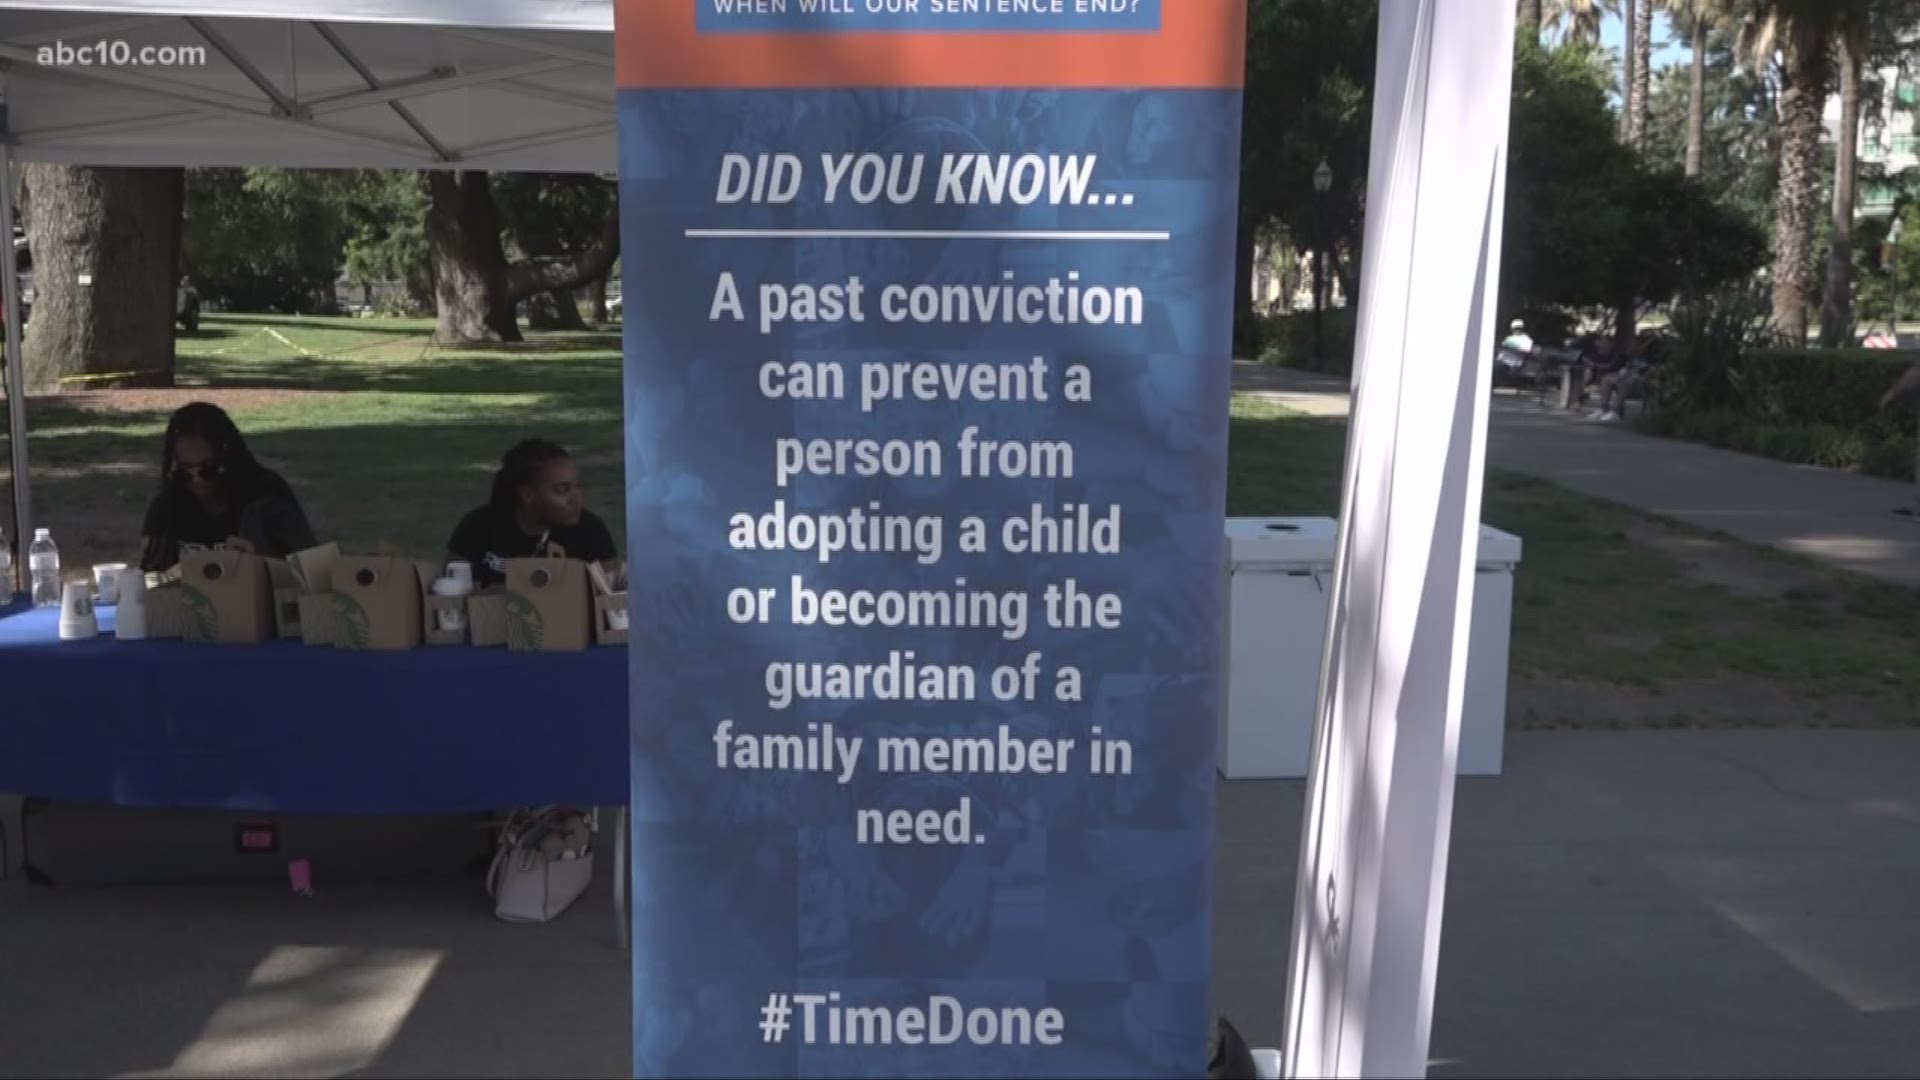 The #TimeDone campaign advocates for the automatic removal of a conviction from a person's record once they've completed their sentence.